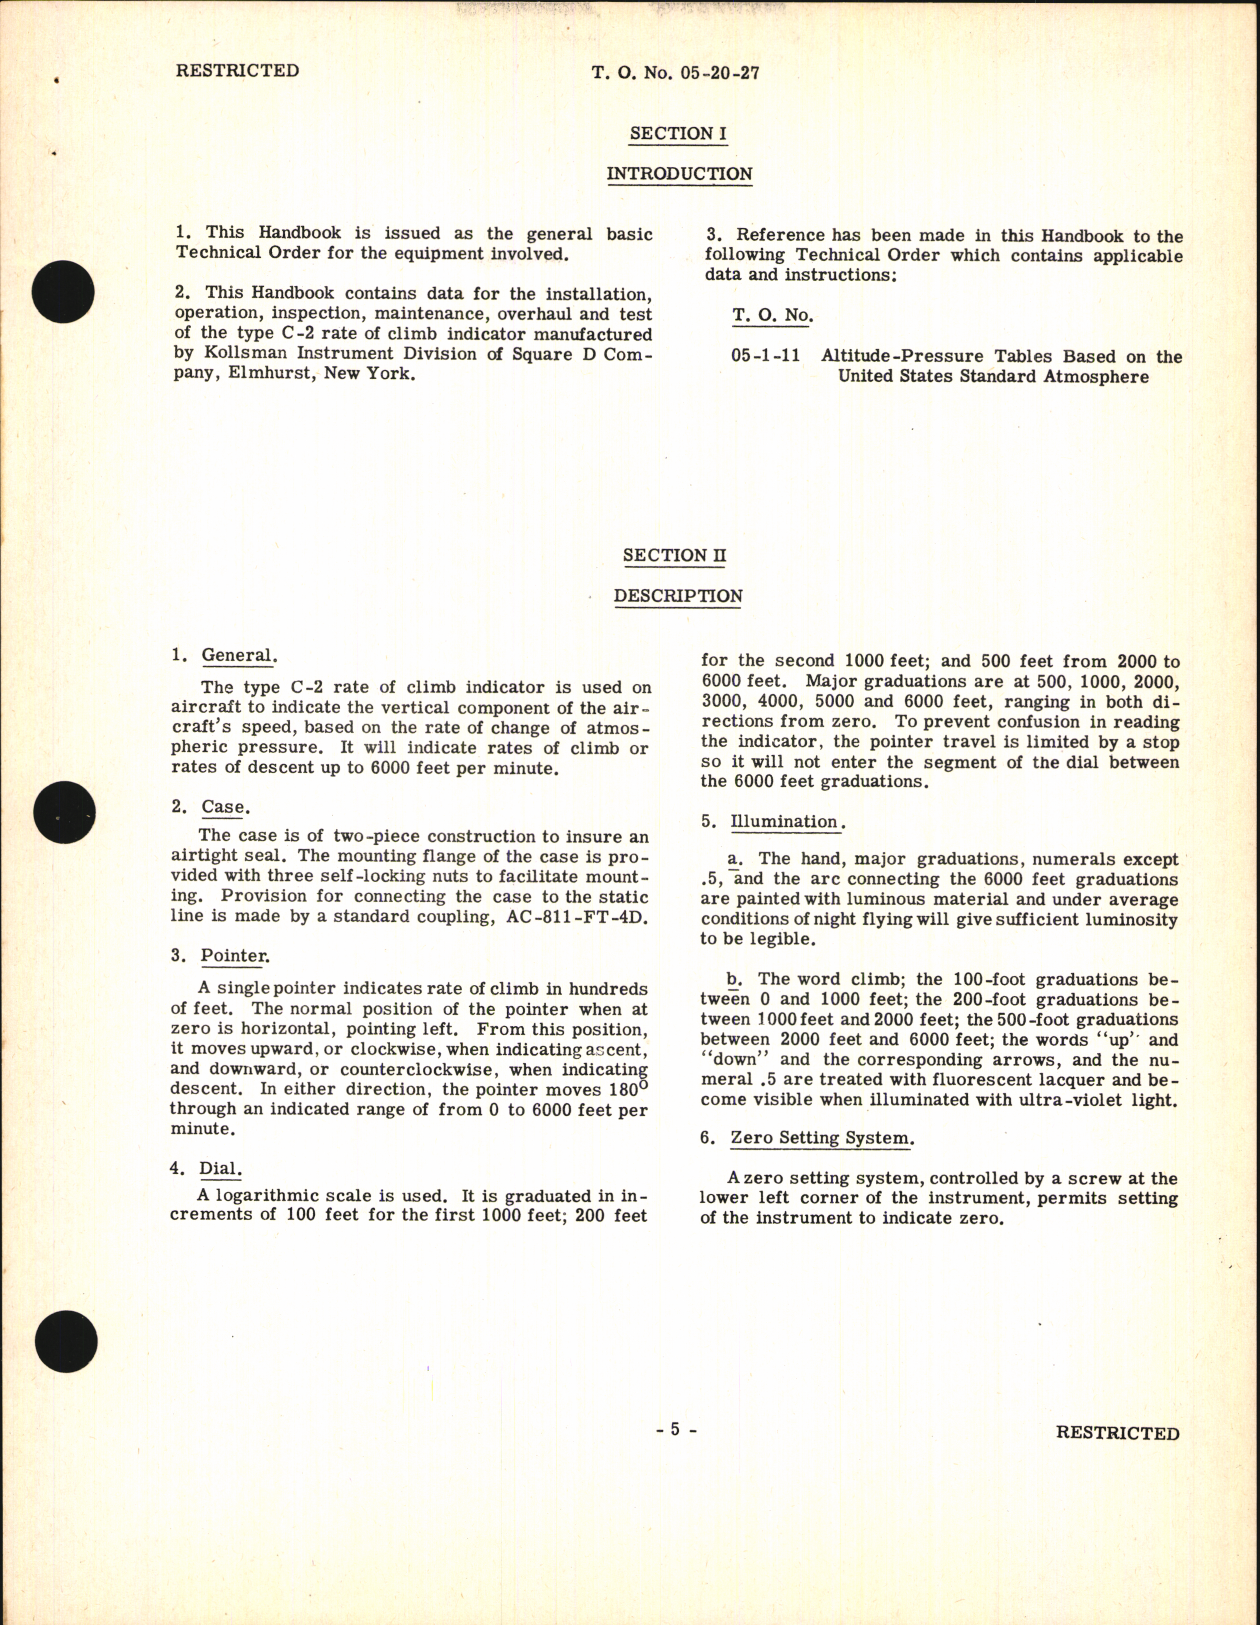 Sample page 7 from AirCorps Library document: Handbook of Instructions with Parts Catalog for Type C-2 Rate of Climb Indicator